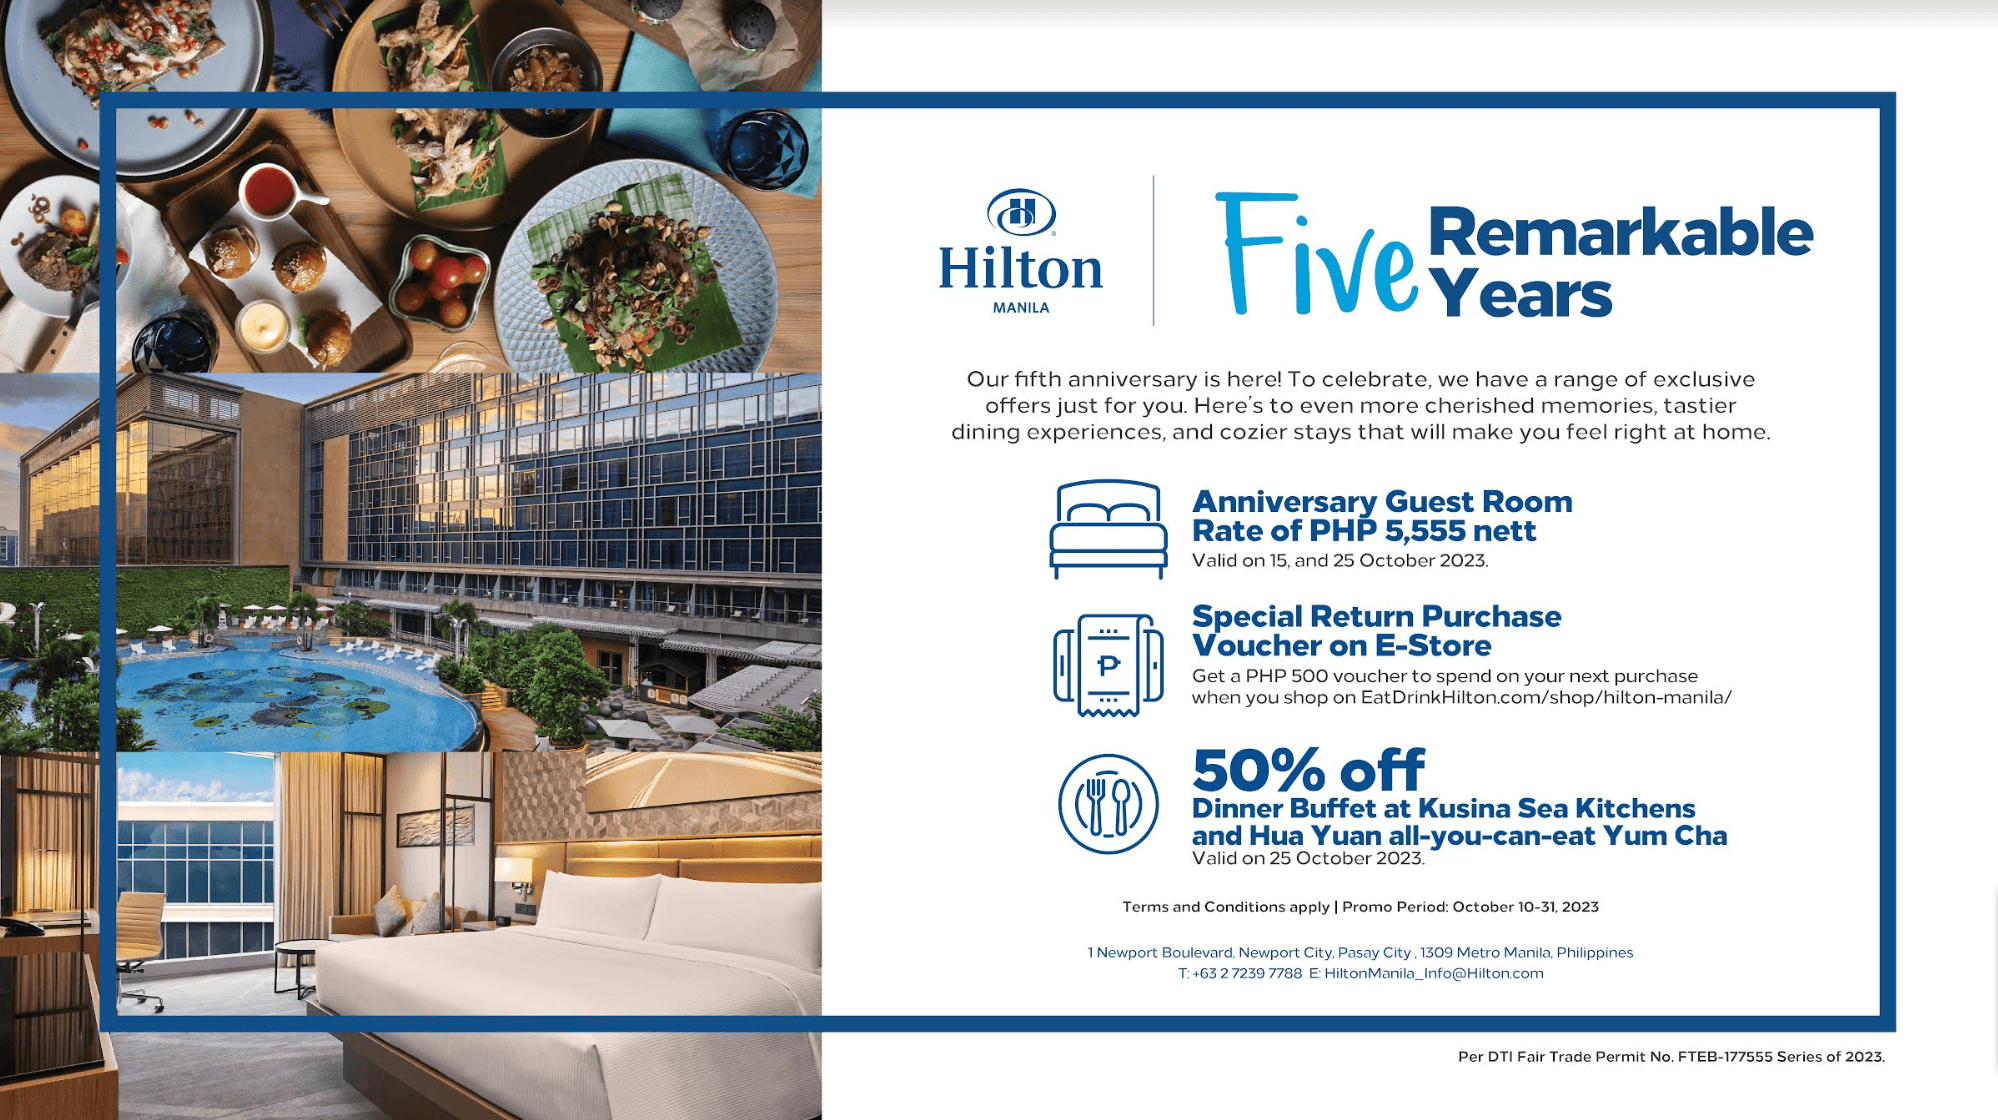 Hilton Manila marks 5th year anniversary with exclusive anniversary promotions